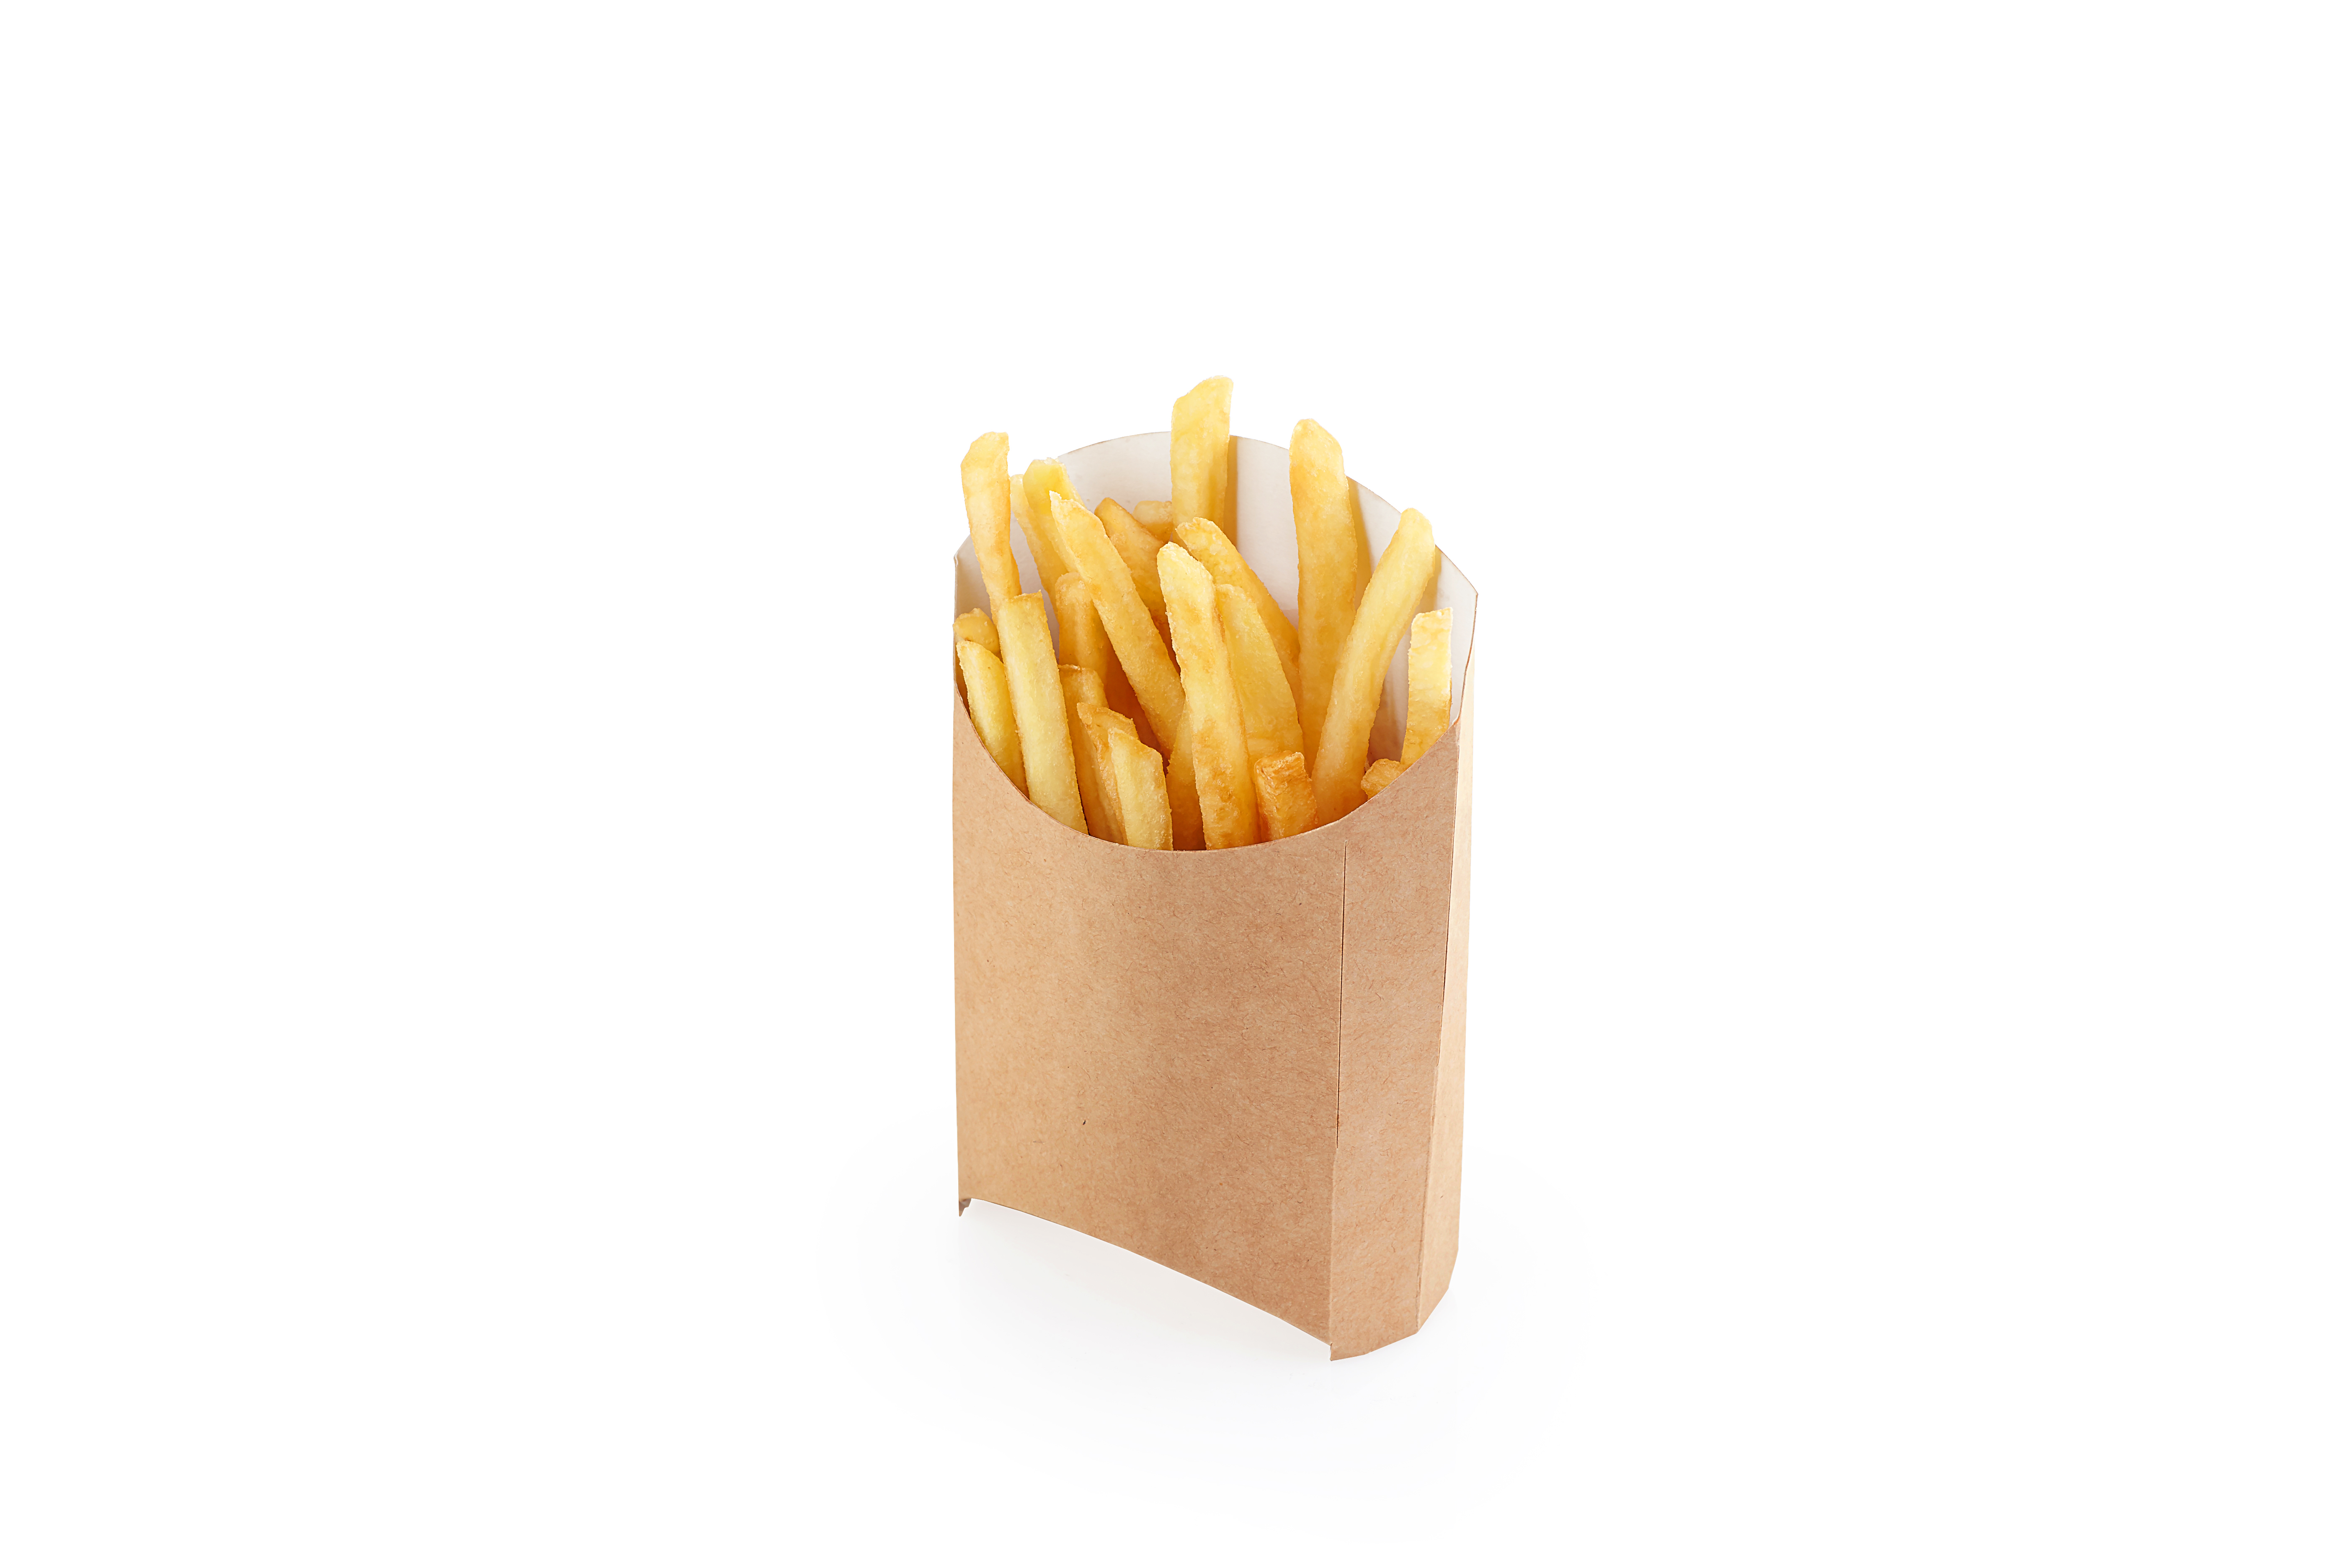 OSQ FRY L packaging for French fries